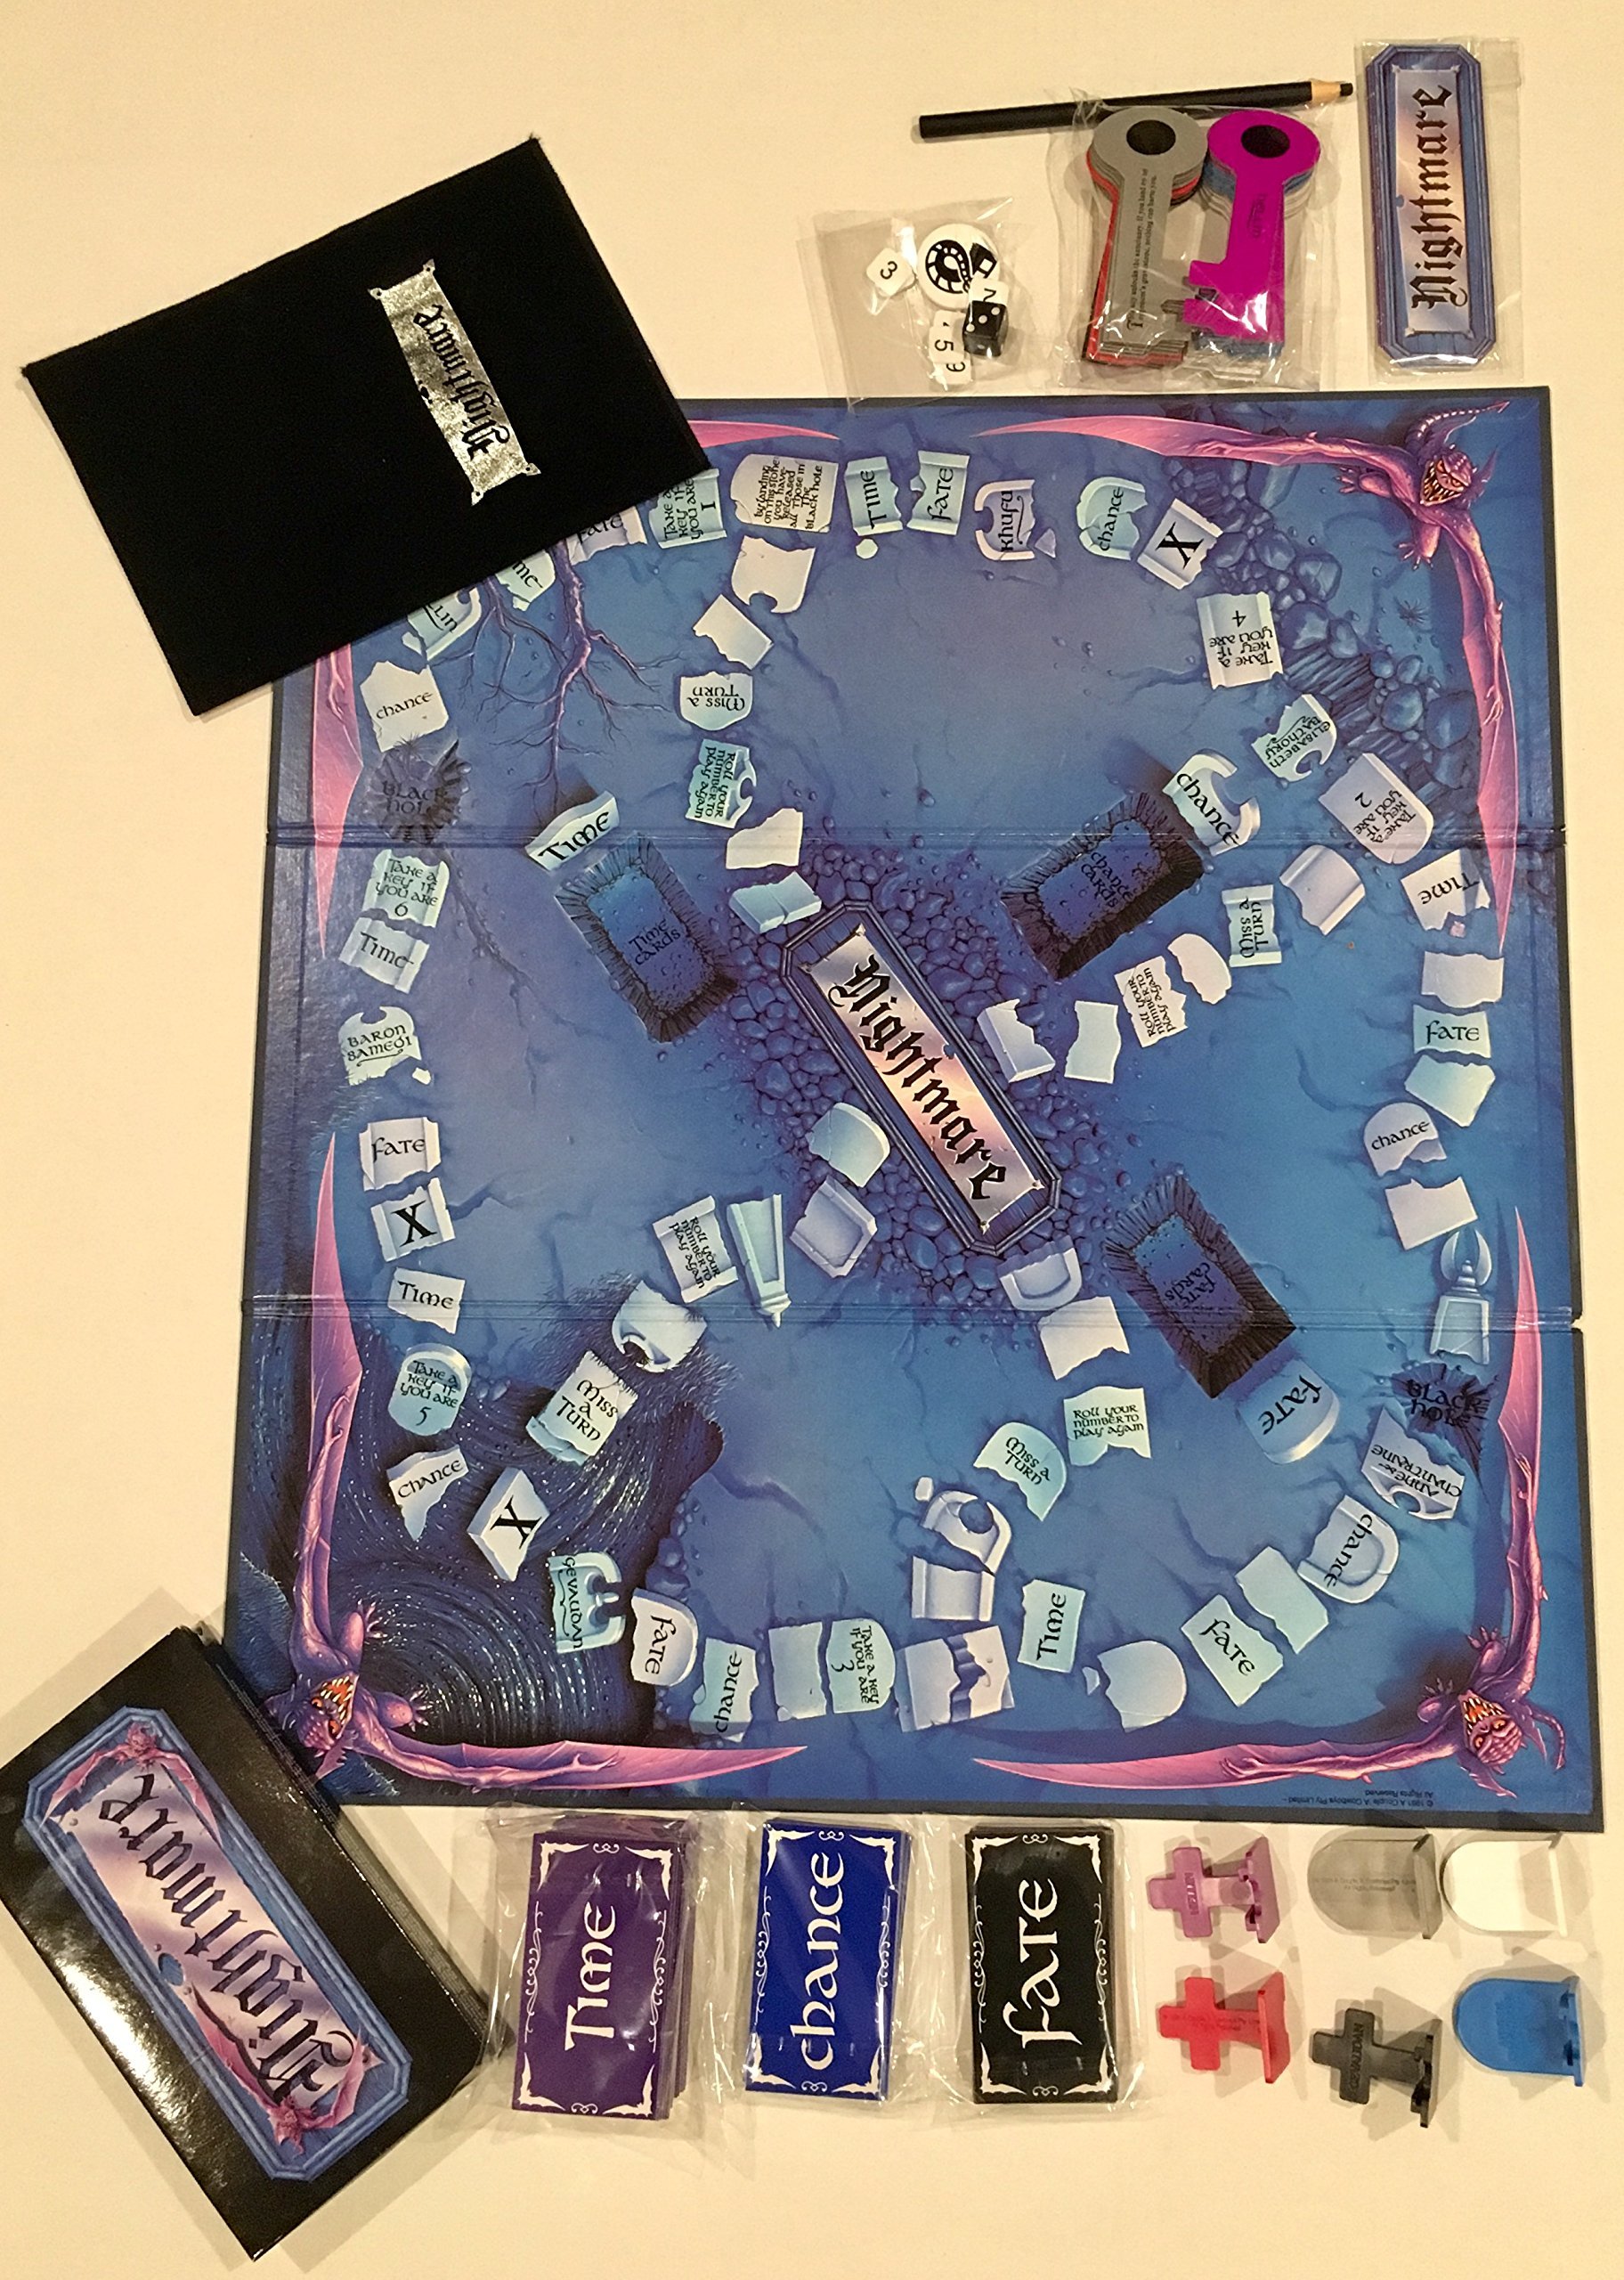 Nightmare: The Video Board-game by NECA